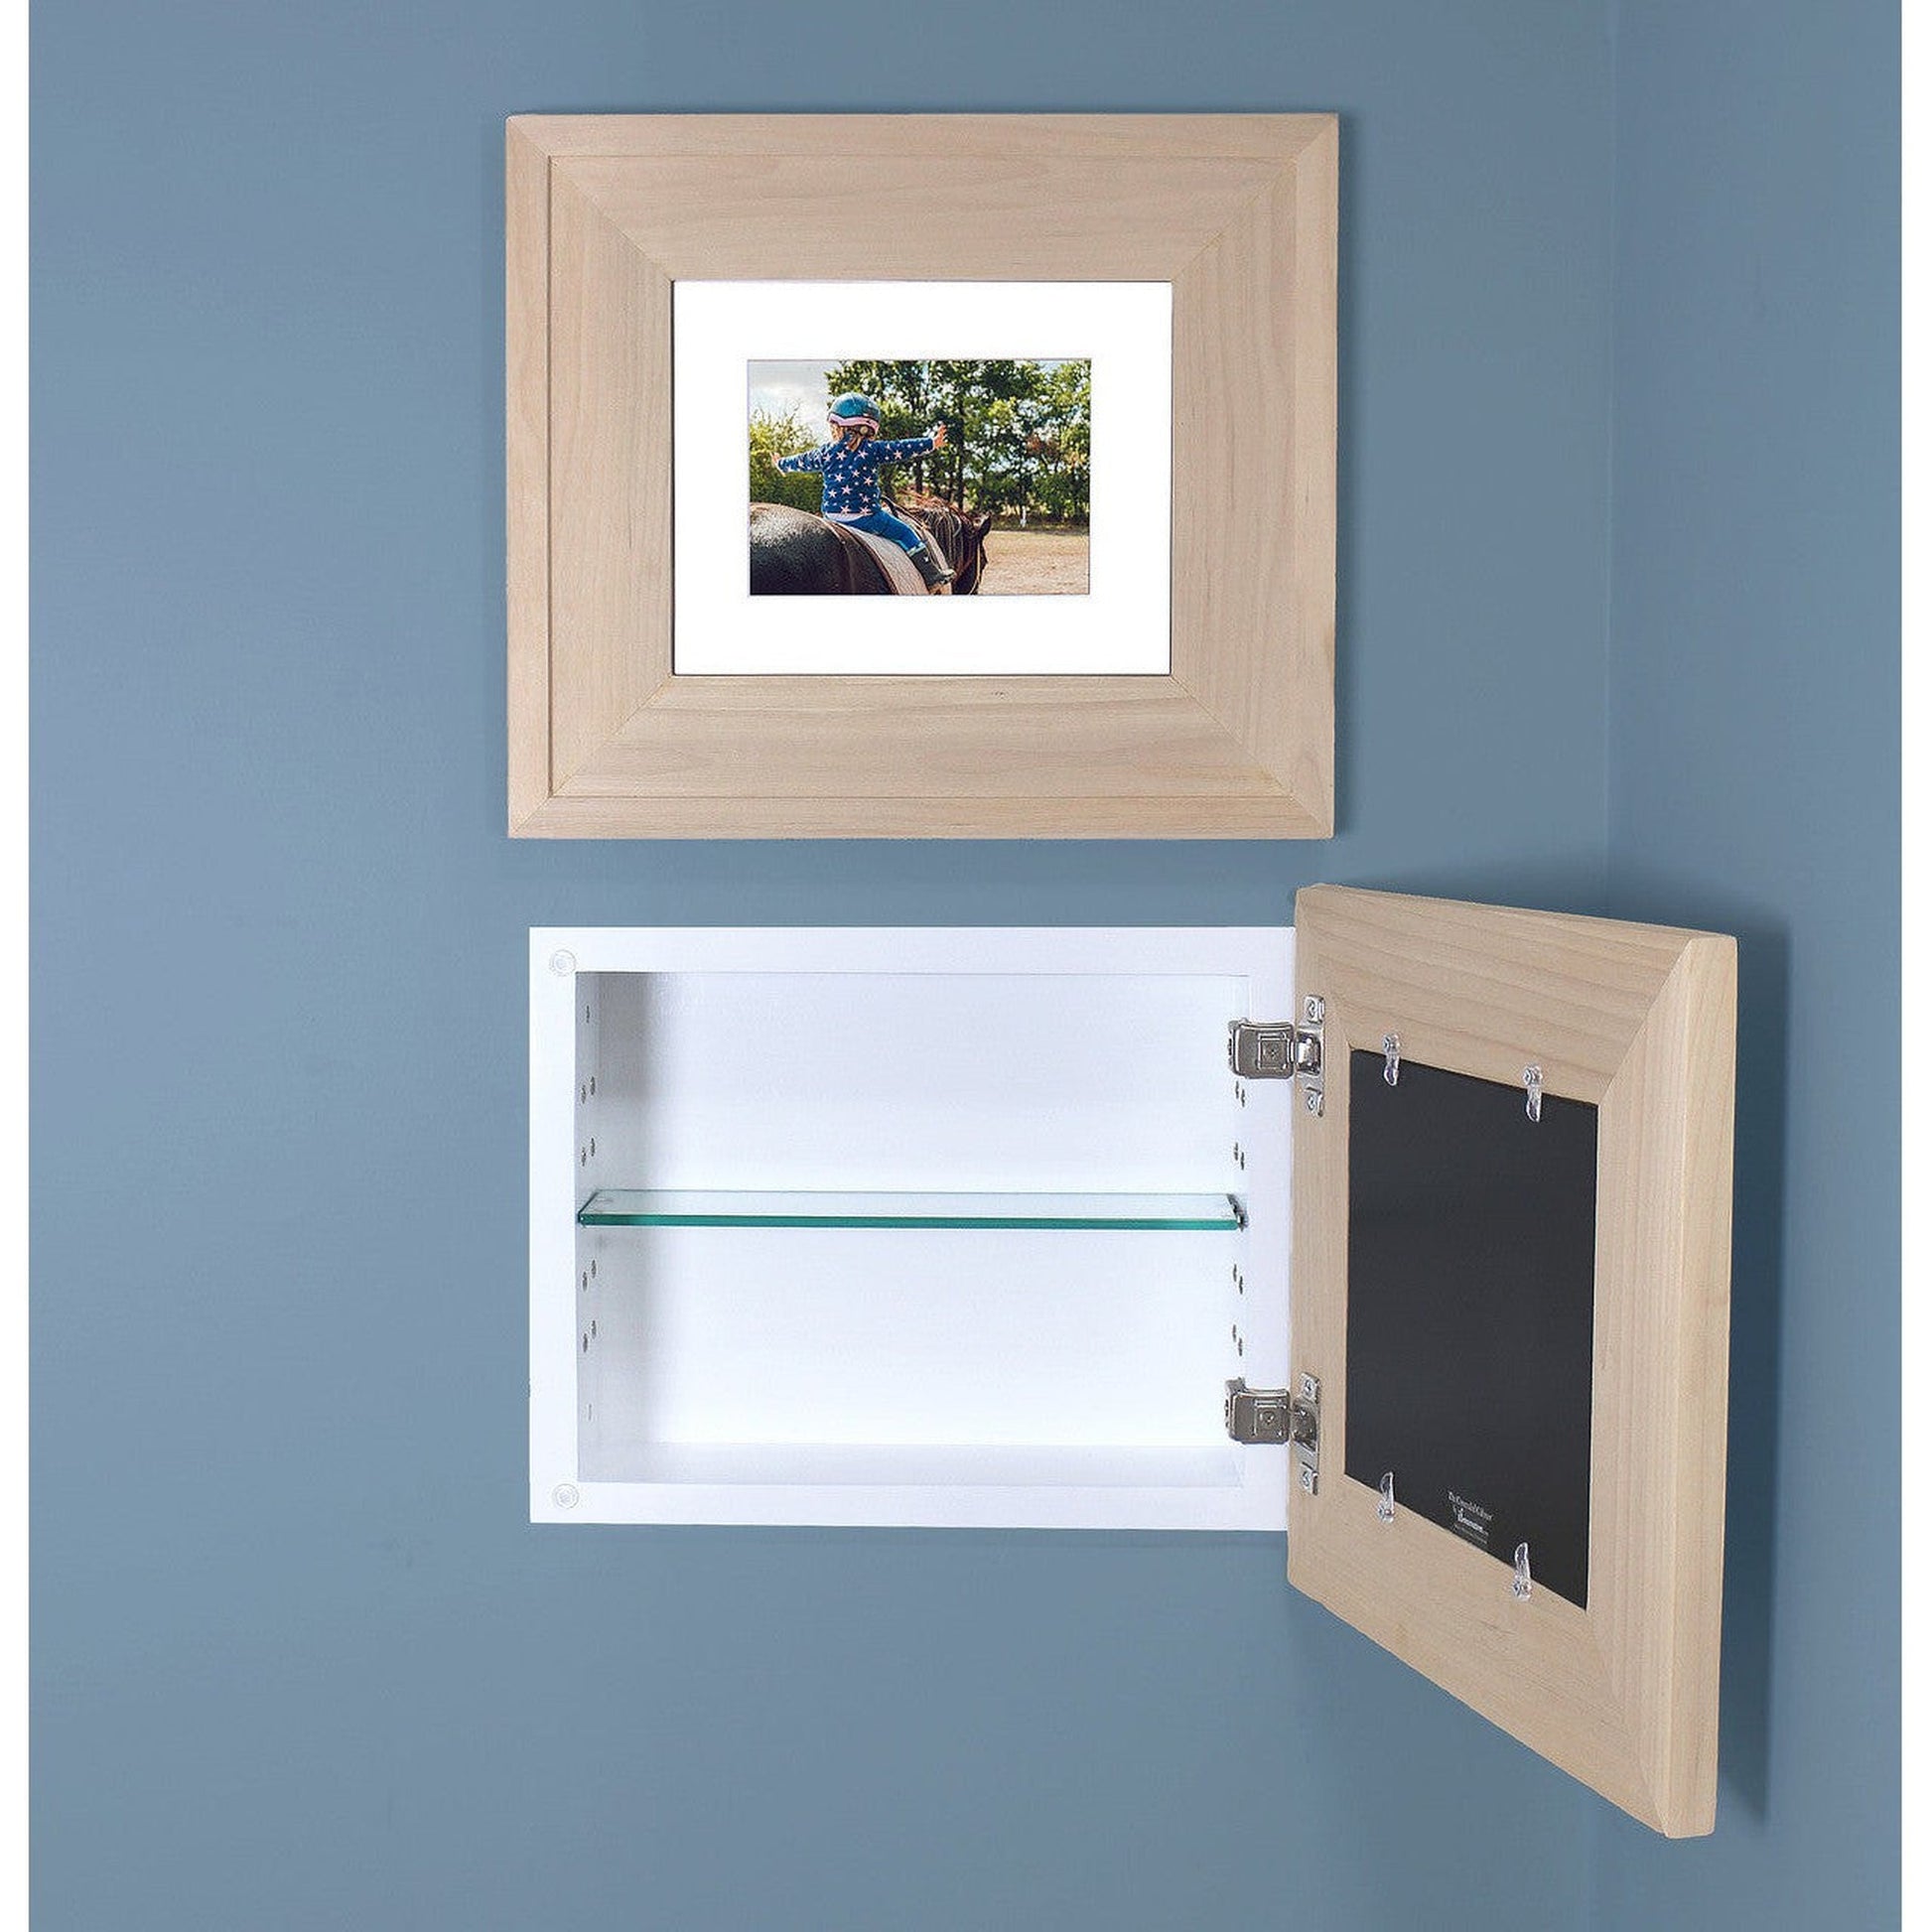 Fox Hollow Furnishings 14" x 11" Unfinished Raised Edge Compact Landscape Special 3" Depth Recessed Picture Frame Medicine Cabinet With White Matting